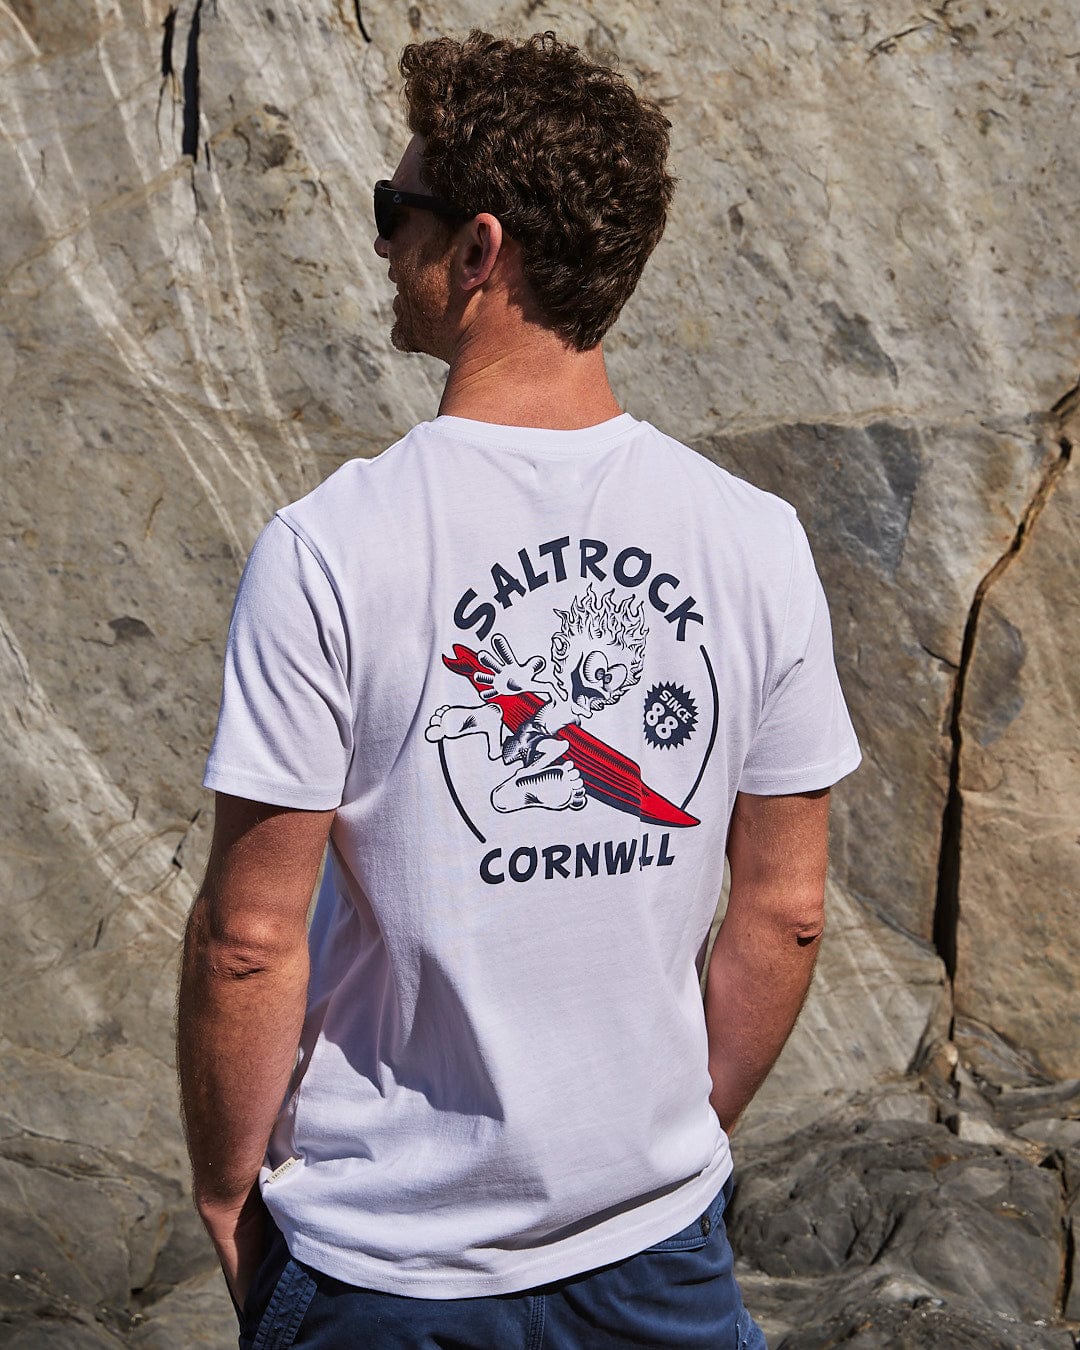 A man wearing sunglasses and a Wave Rider Cornwall Mens Short Sleeve T-shirt in white made of peached soft material with a Saltrock logo stands facing a rocky background.